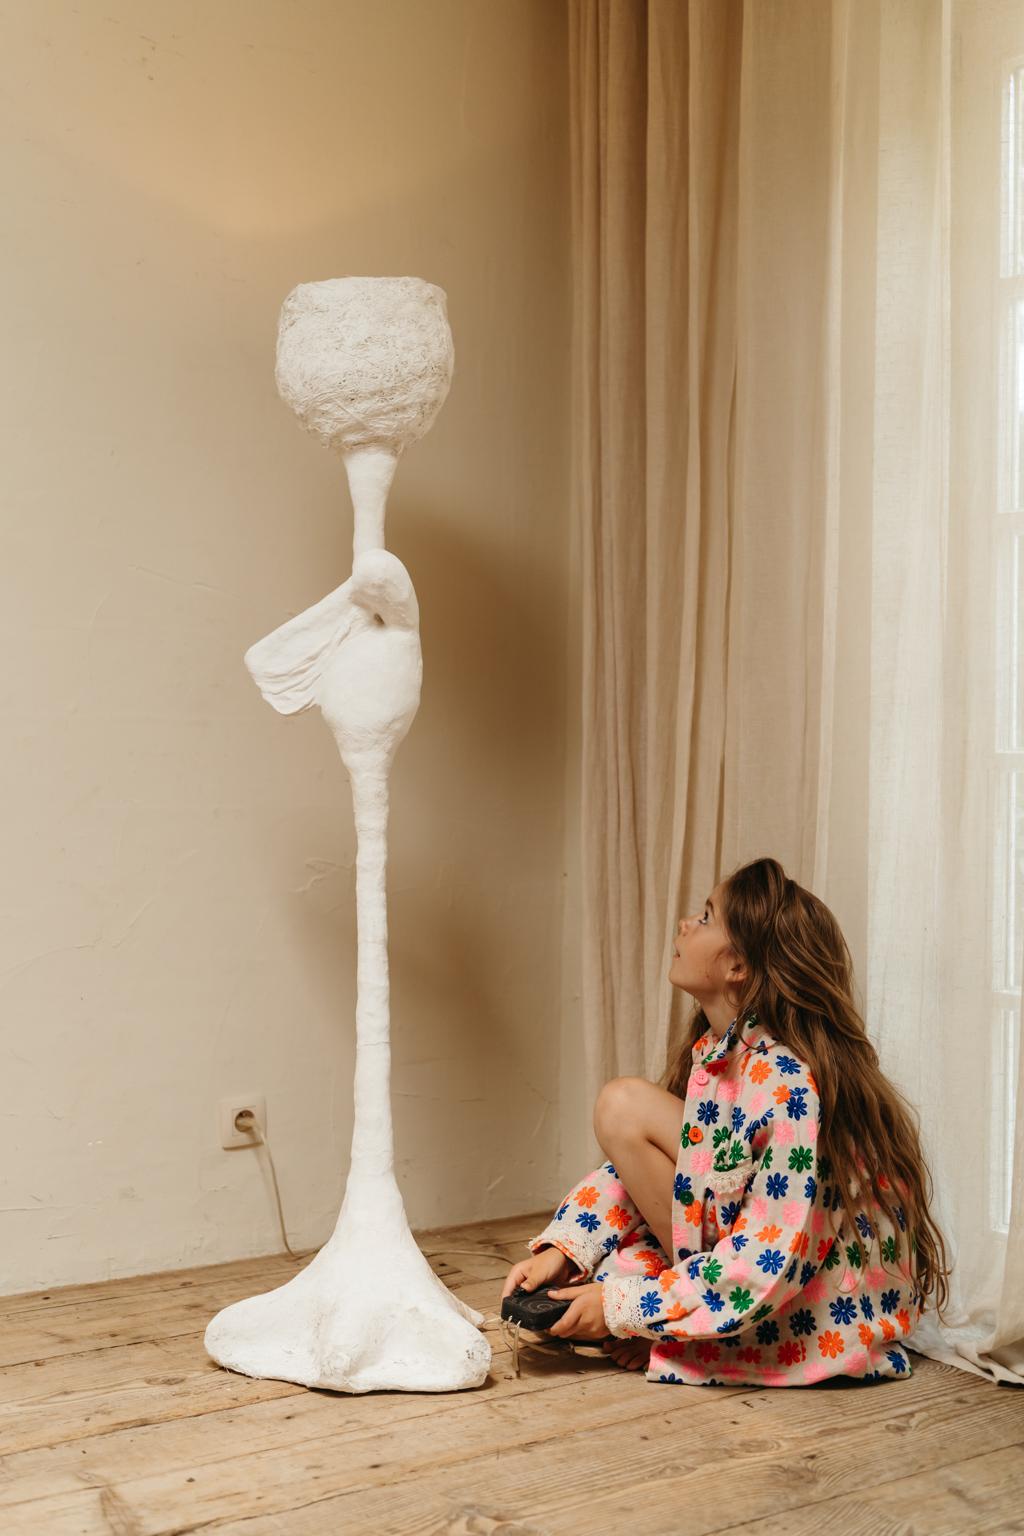 French artist Chan Chen made this lamp for a house in Nice, South of France,
during the 1990's, a unique piece.